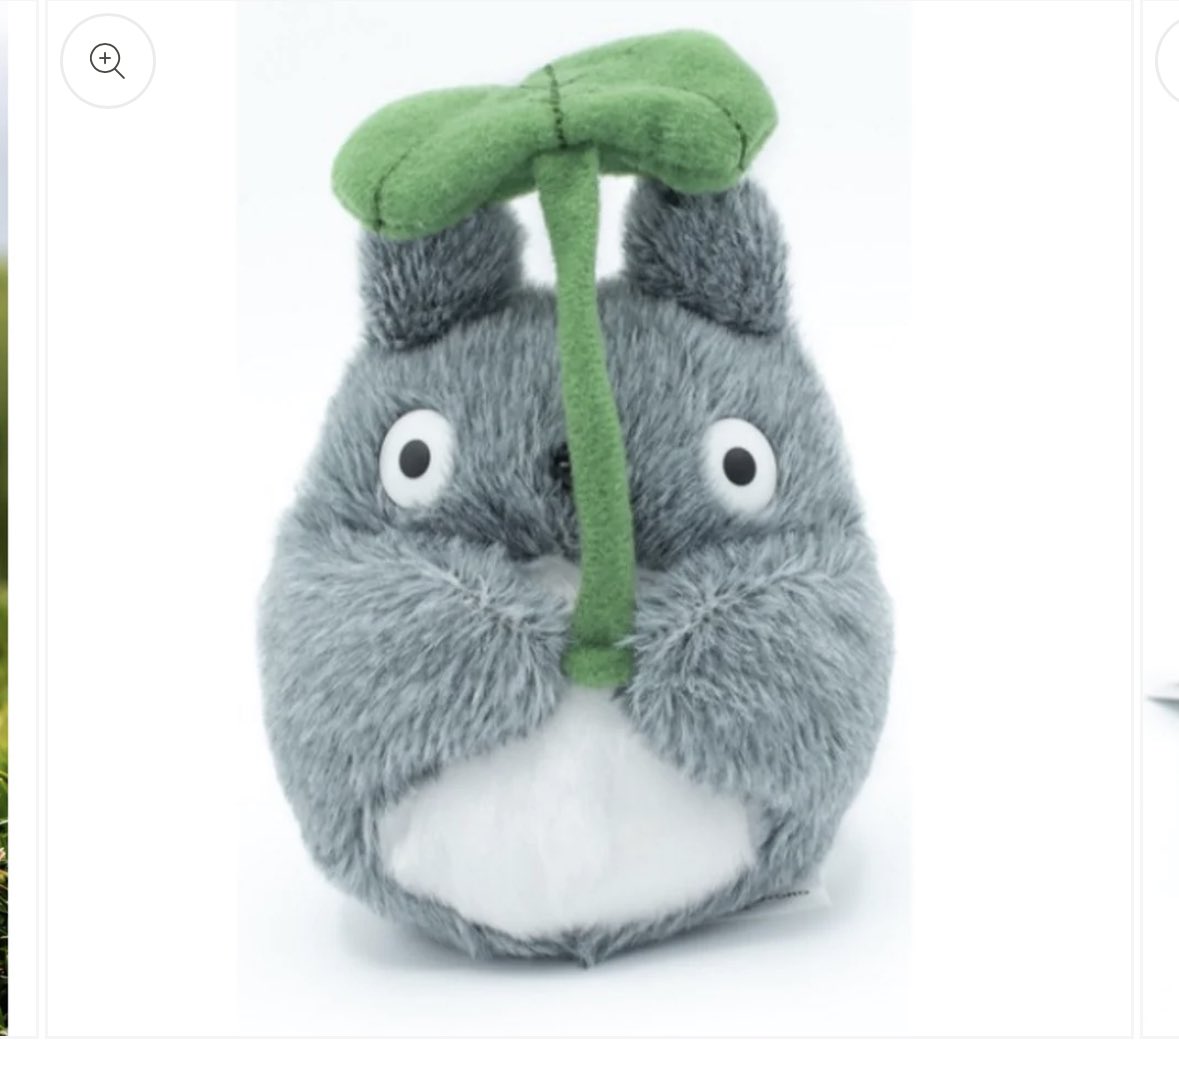 Poor #totoro we got from @TheRSC has been left on the W3 bus. We’ve done all the lost property things with @Arriva_London, but if you happen to be on a W3, please peel your eyes. 5 year old was up front of top deck…..(And is now bereft.). Come home Totoro.